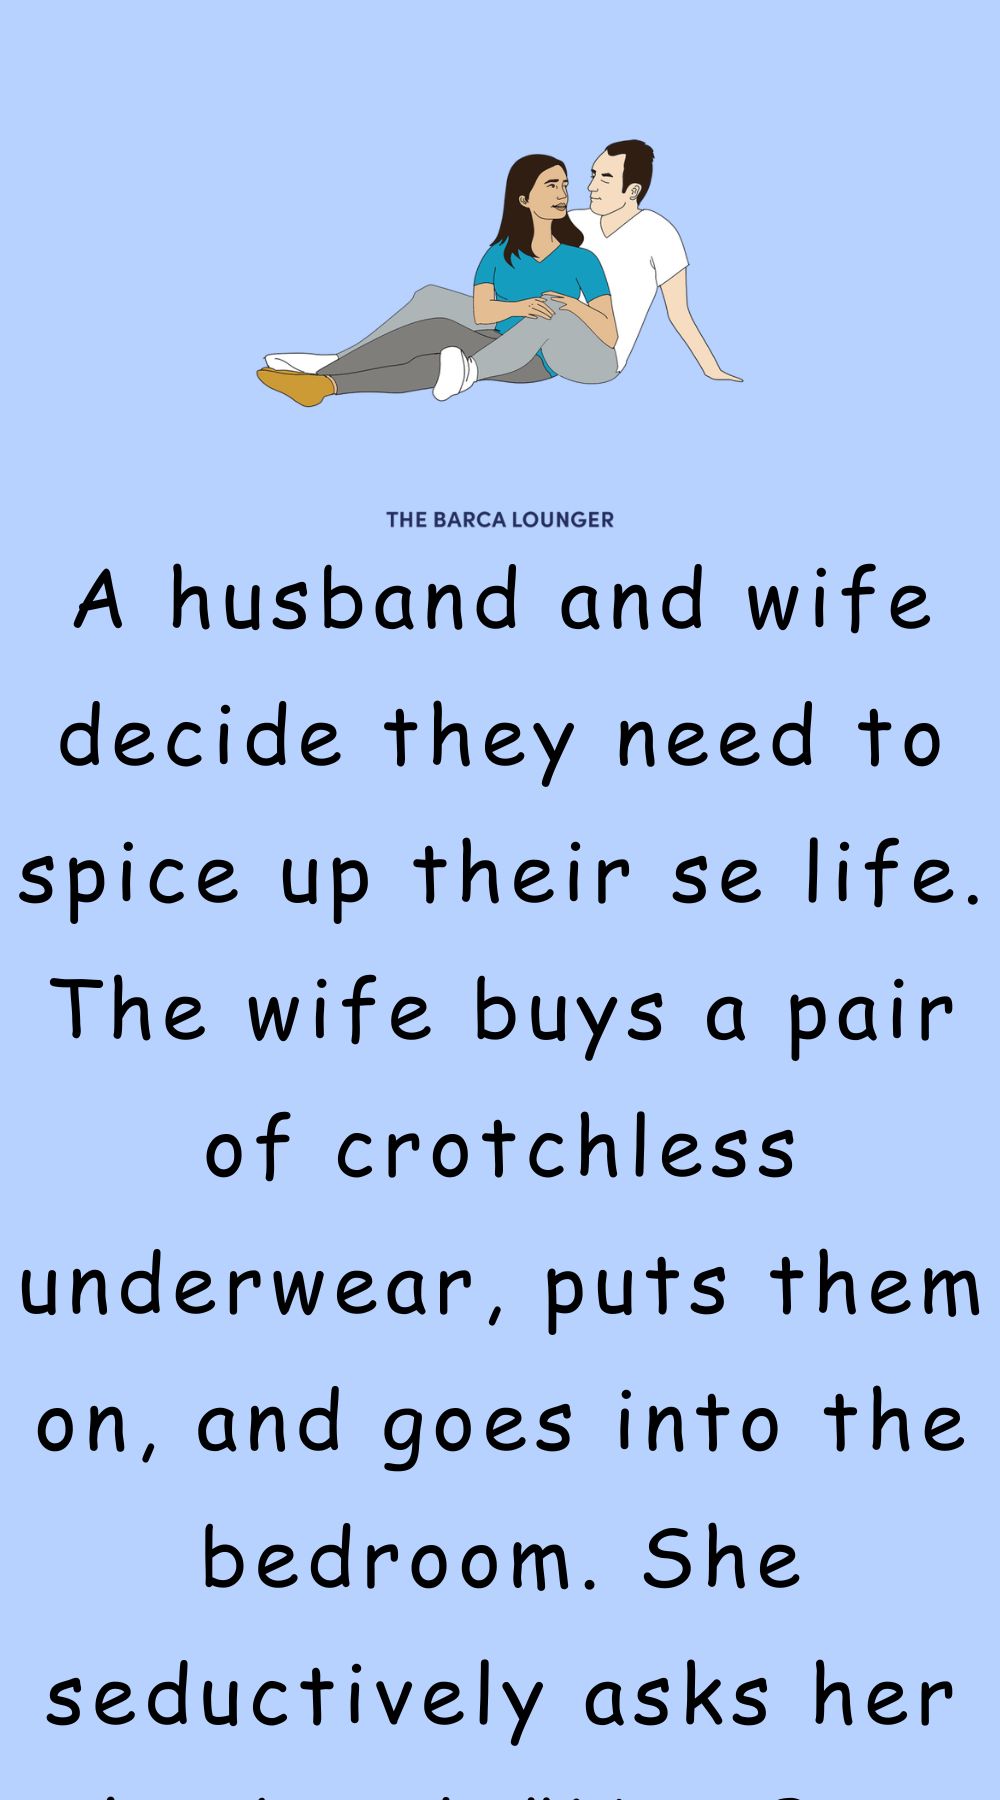 A husband and wife decide they need to spice up